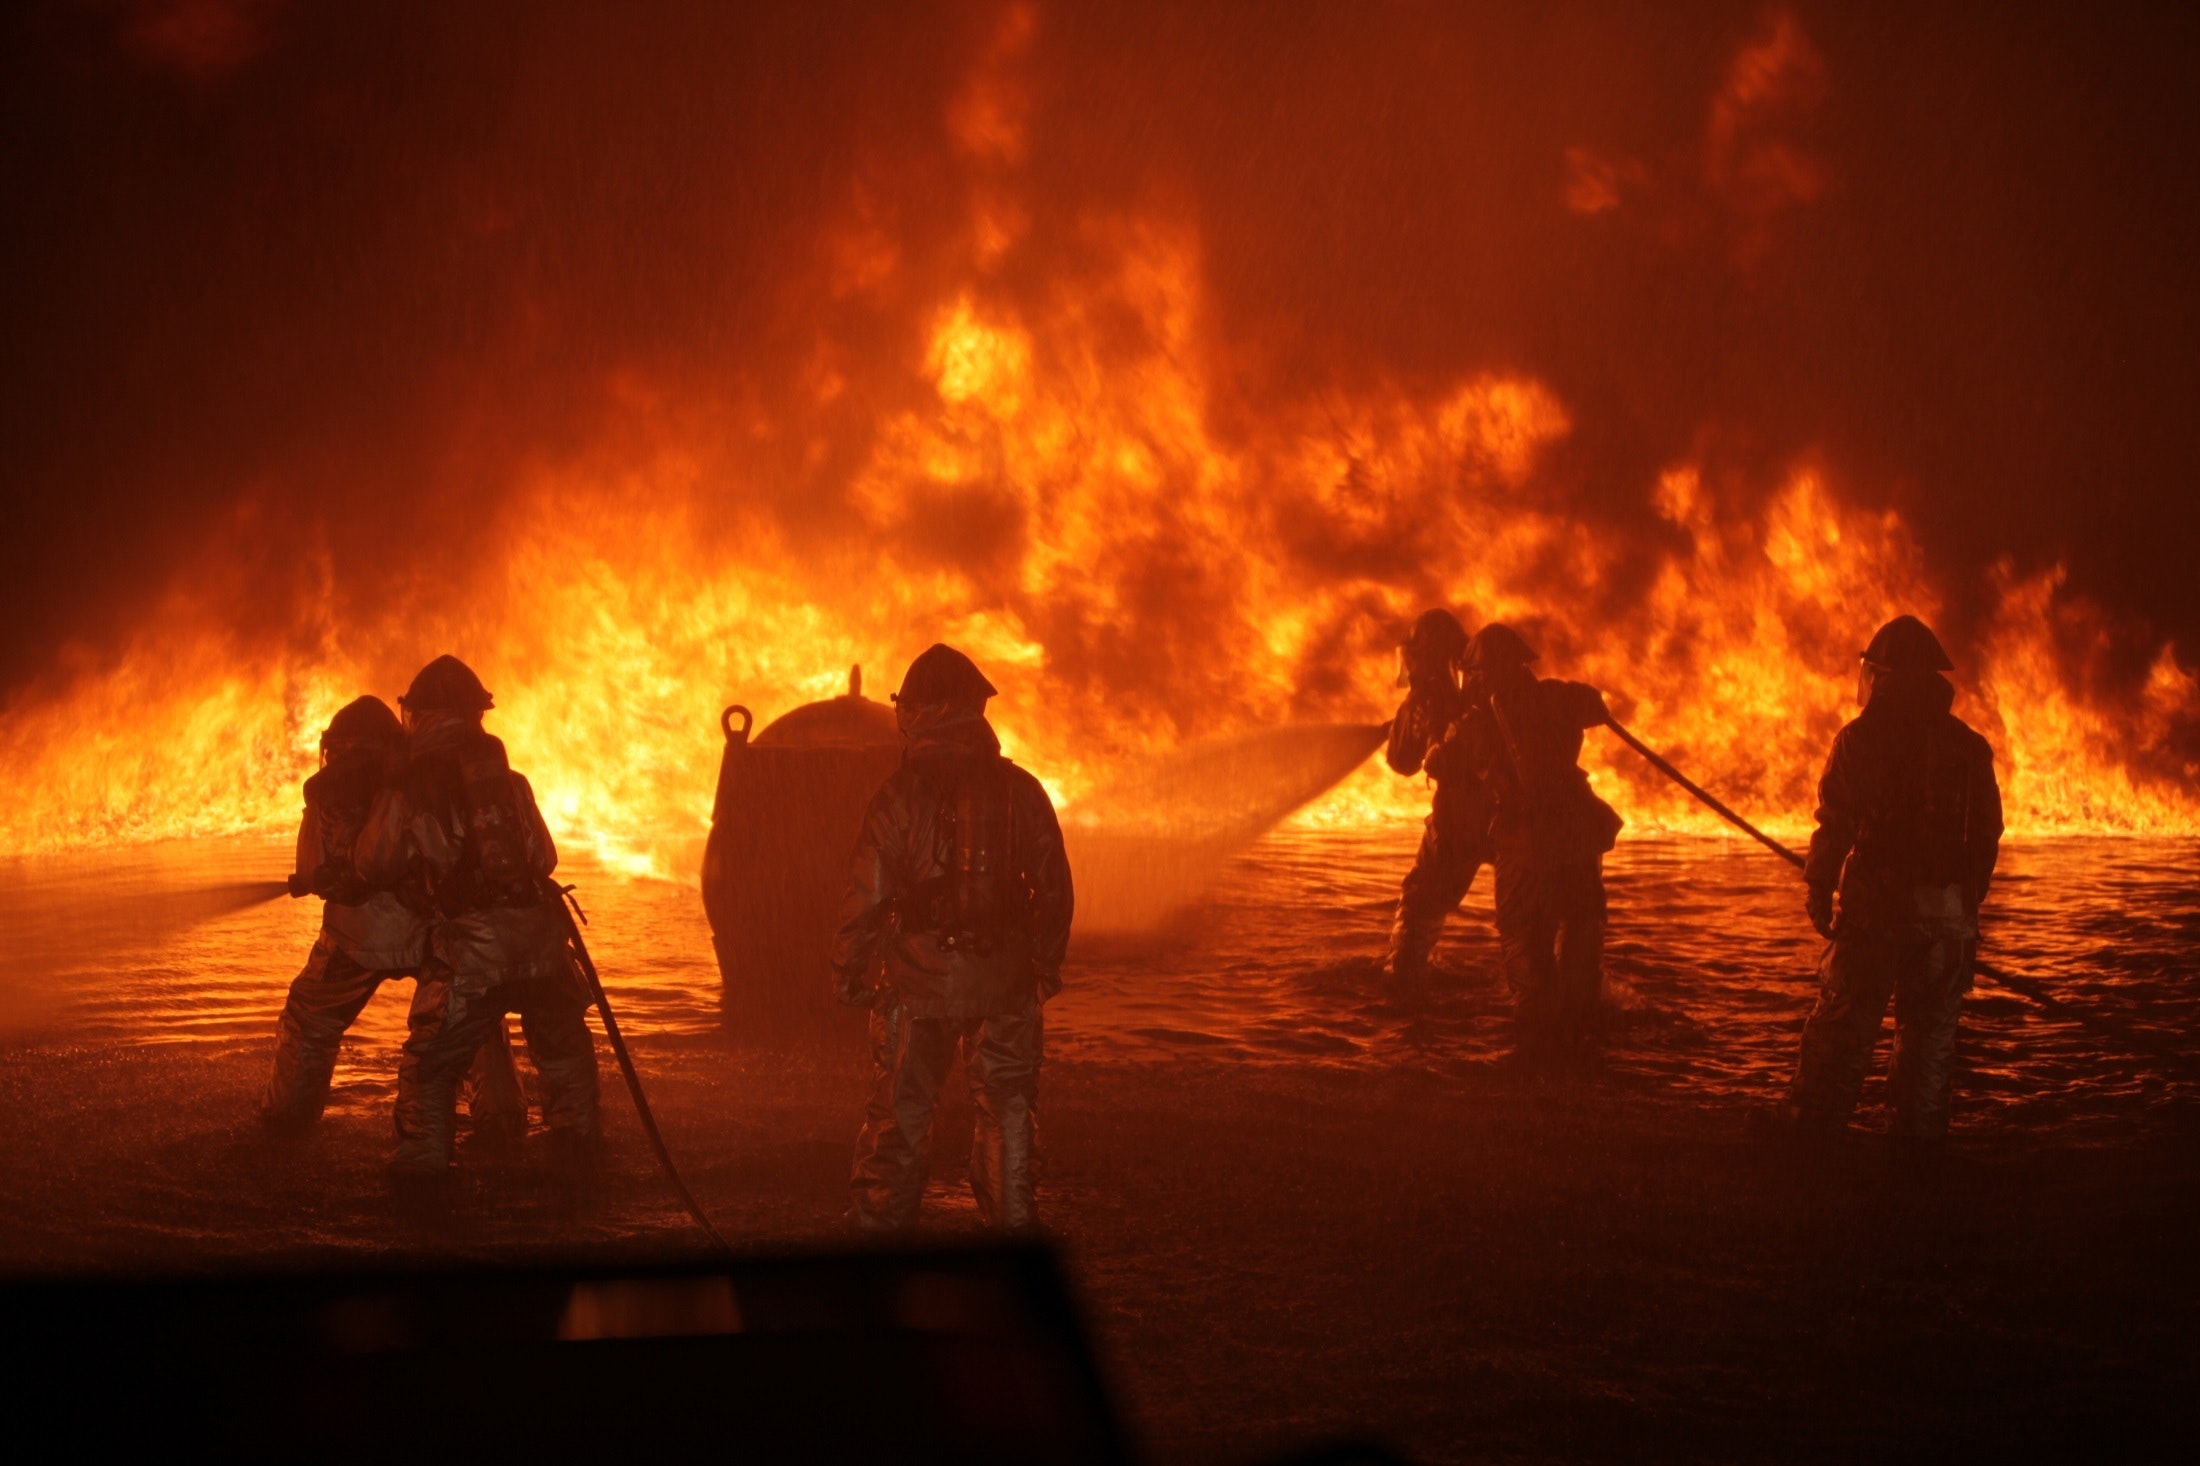 Fire Fighters tackling fire similar to the Kincade Fire in California